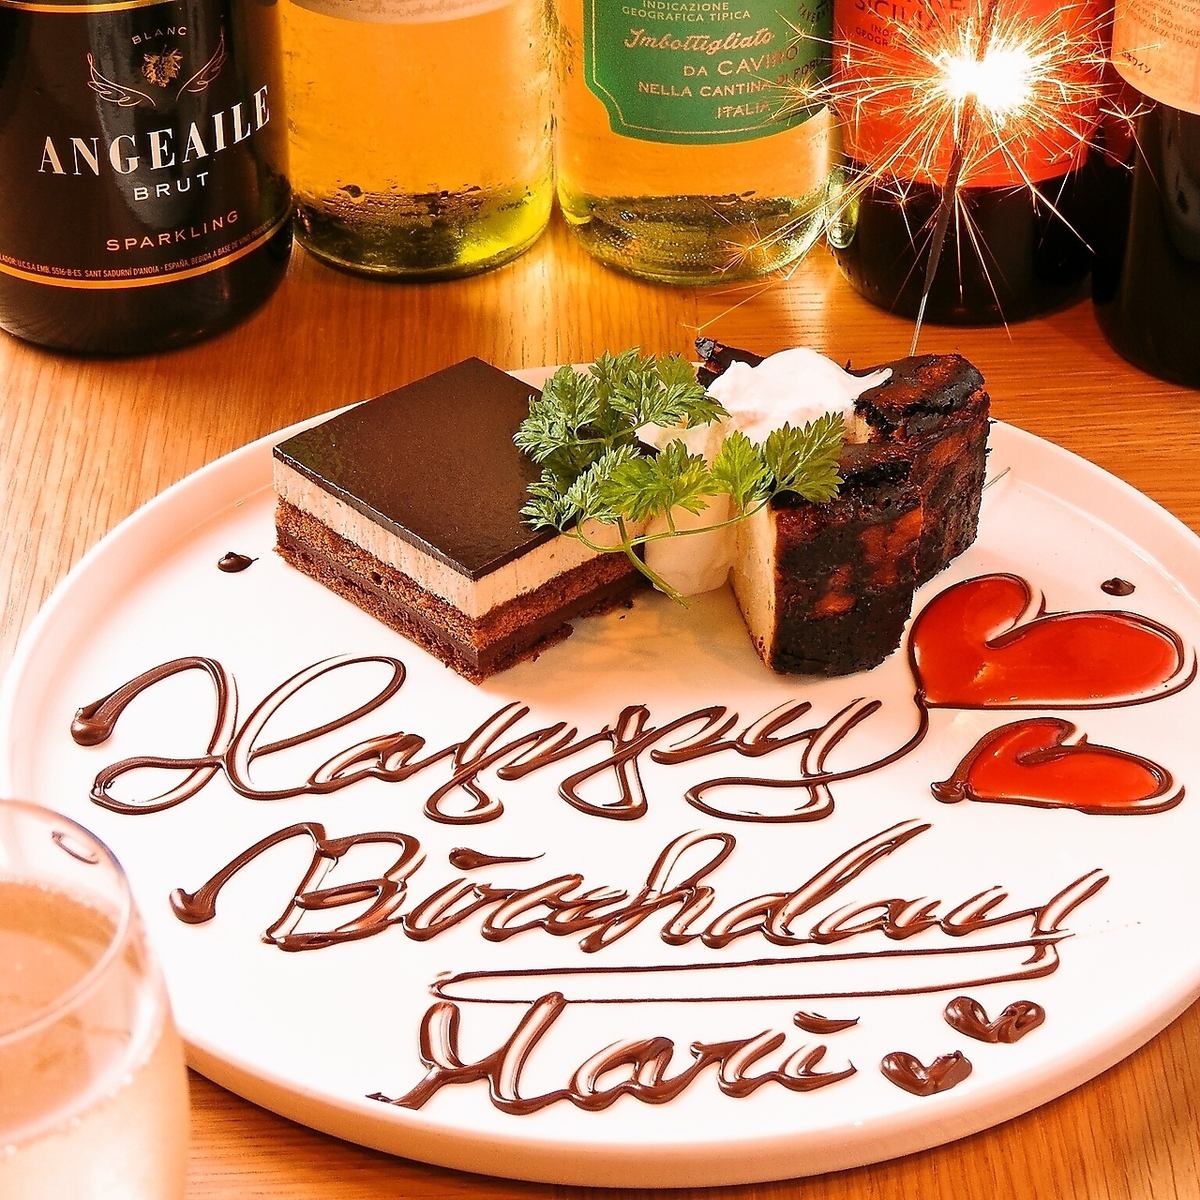 We offer message plates for birthdays and anniversaries!